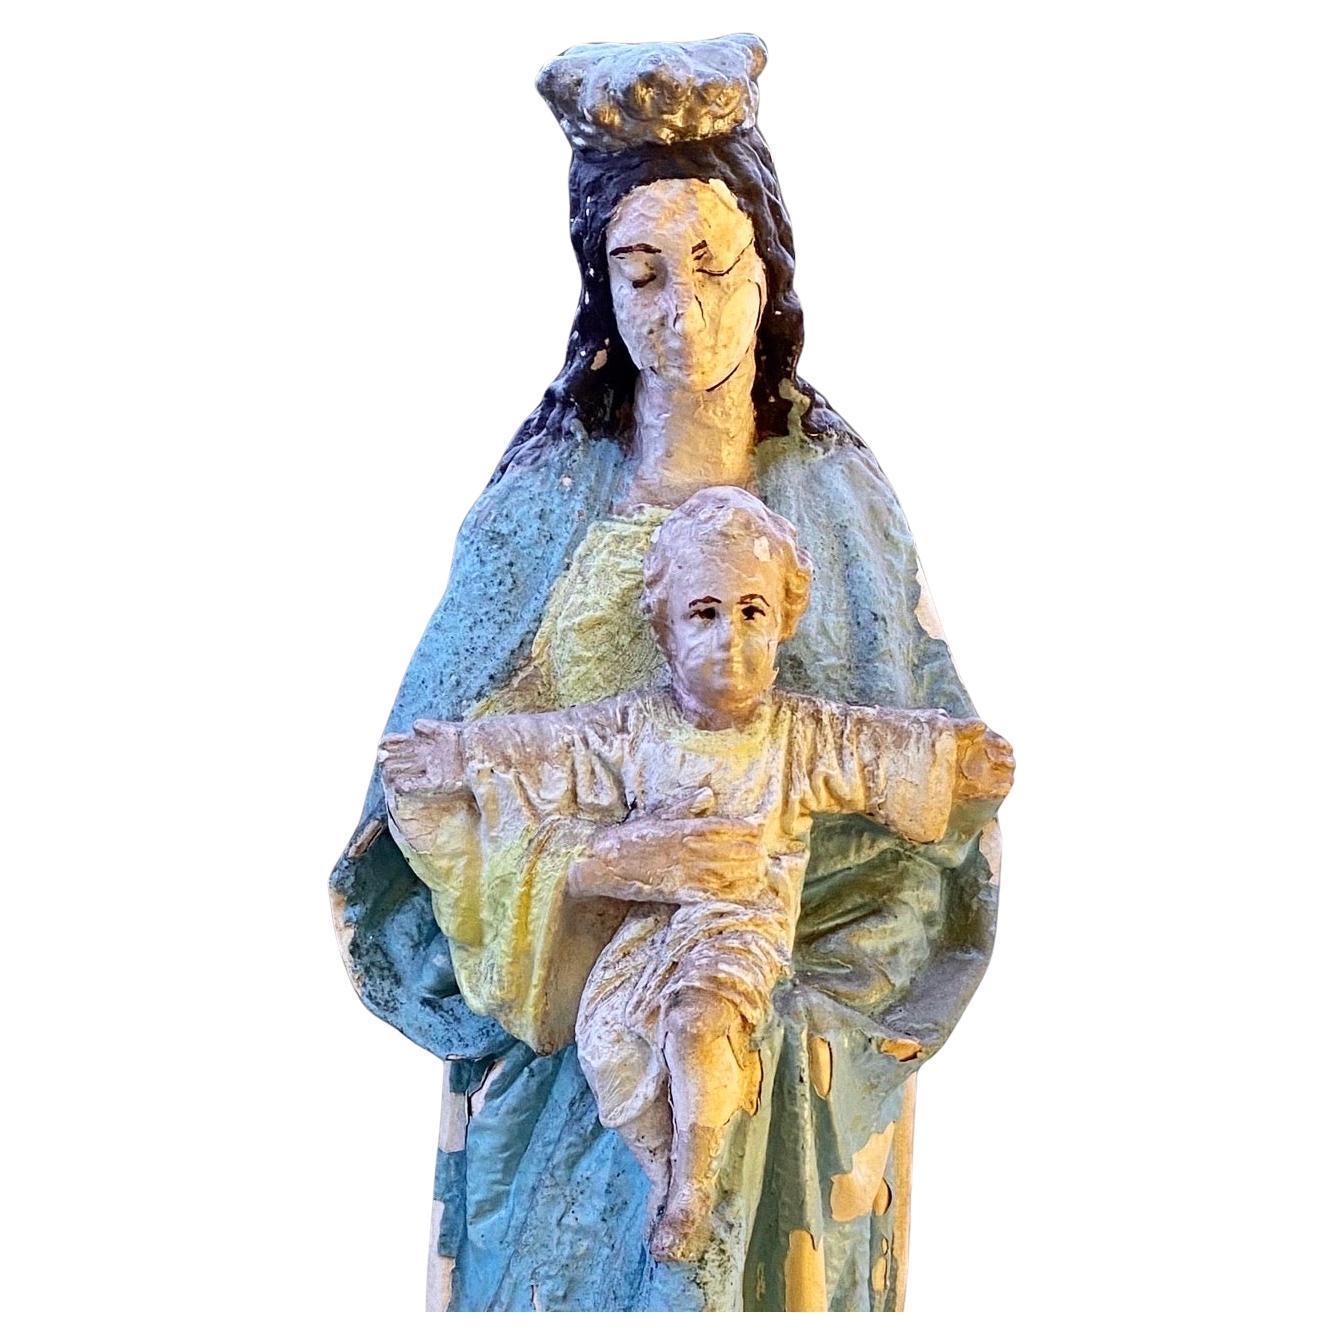 Beautifully aged French plaster Statue of the Virgin Madonna of Notre Dame, with long flowing robe in lovely aged colors, sourced in Paris, France, this statue has beautiful detail and would make a wonderful gift. This statue once likely was housed